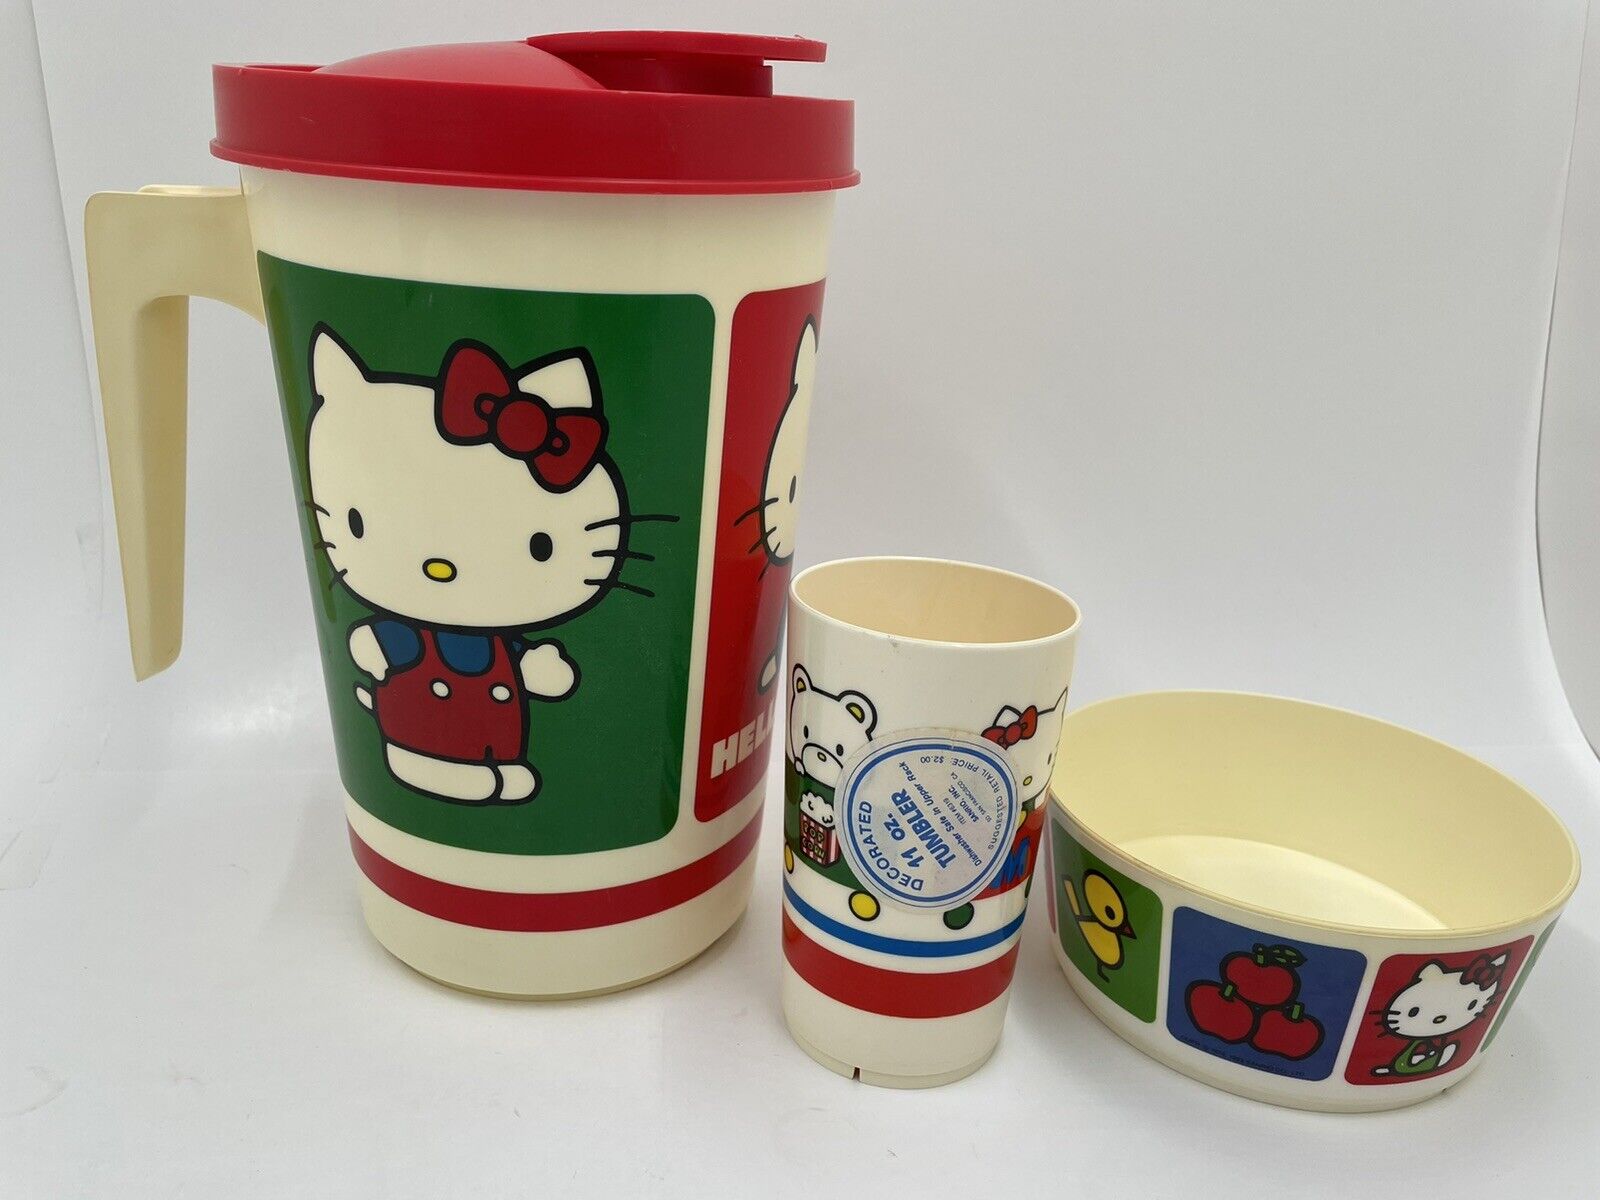 Vintage Sanrio Hello Kitty Decanter, Tumbler Cup And Cereal Bowl Rare 1980s